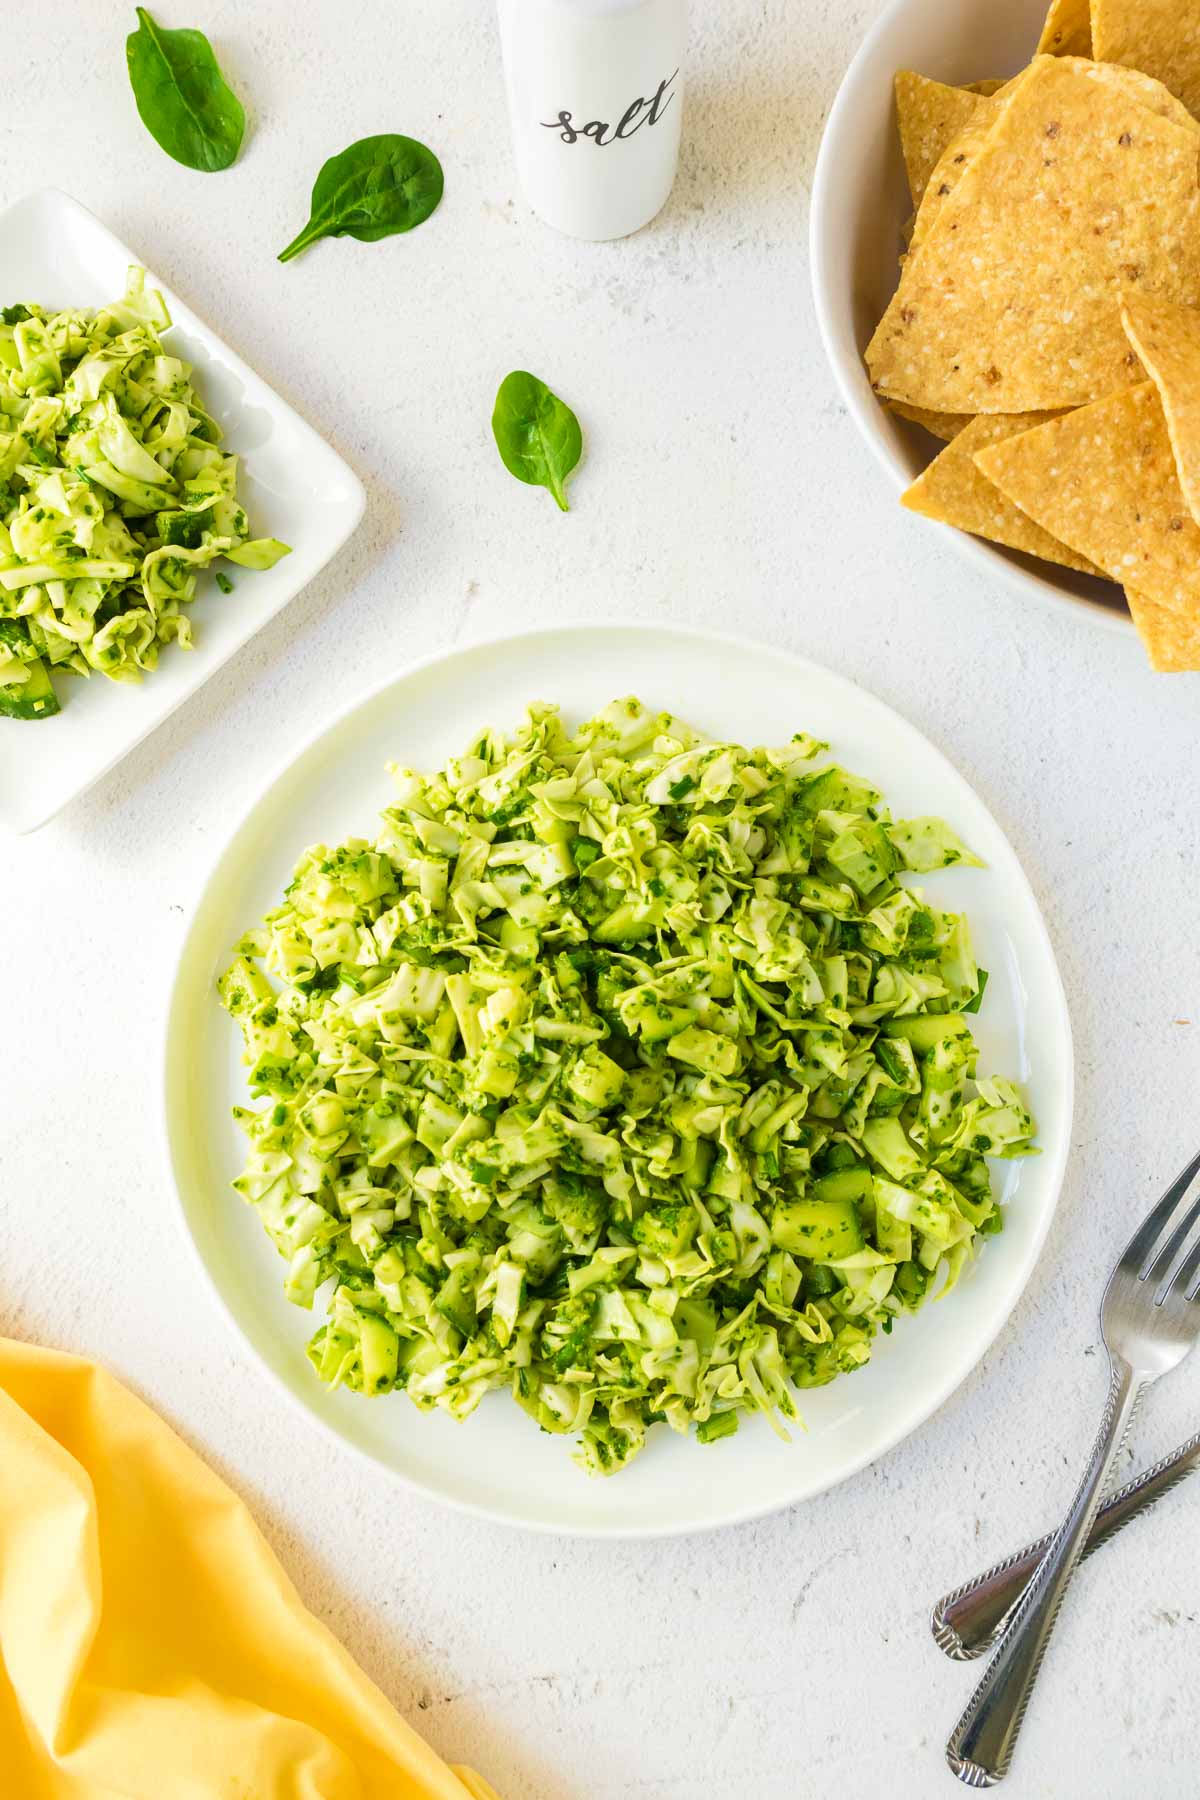 A plate of the viral Tik Tok green goddess salad with tortilla chips on the side.